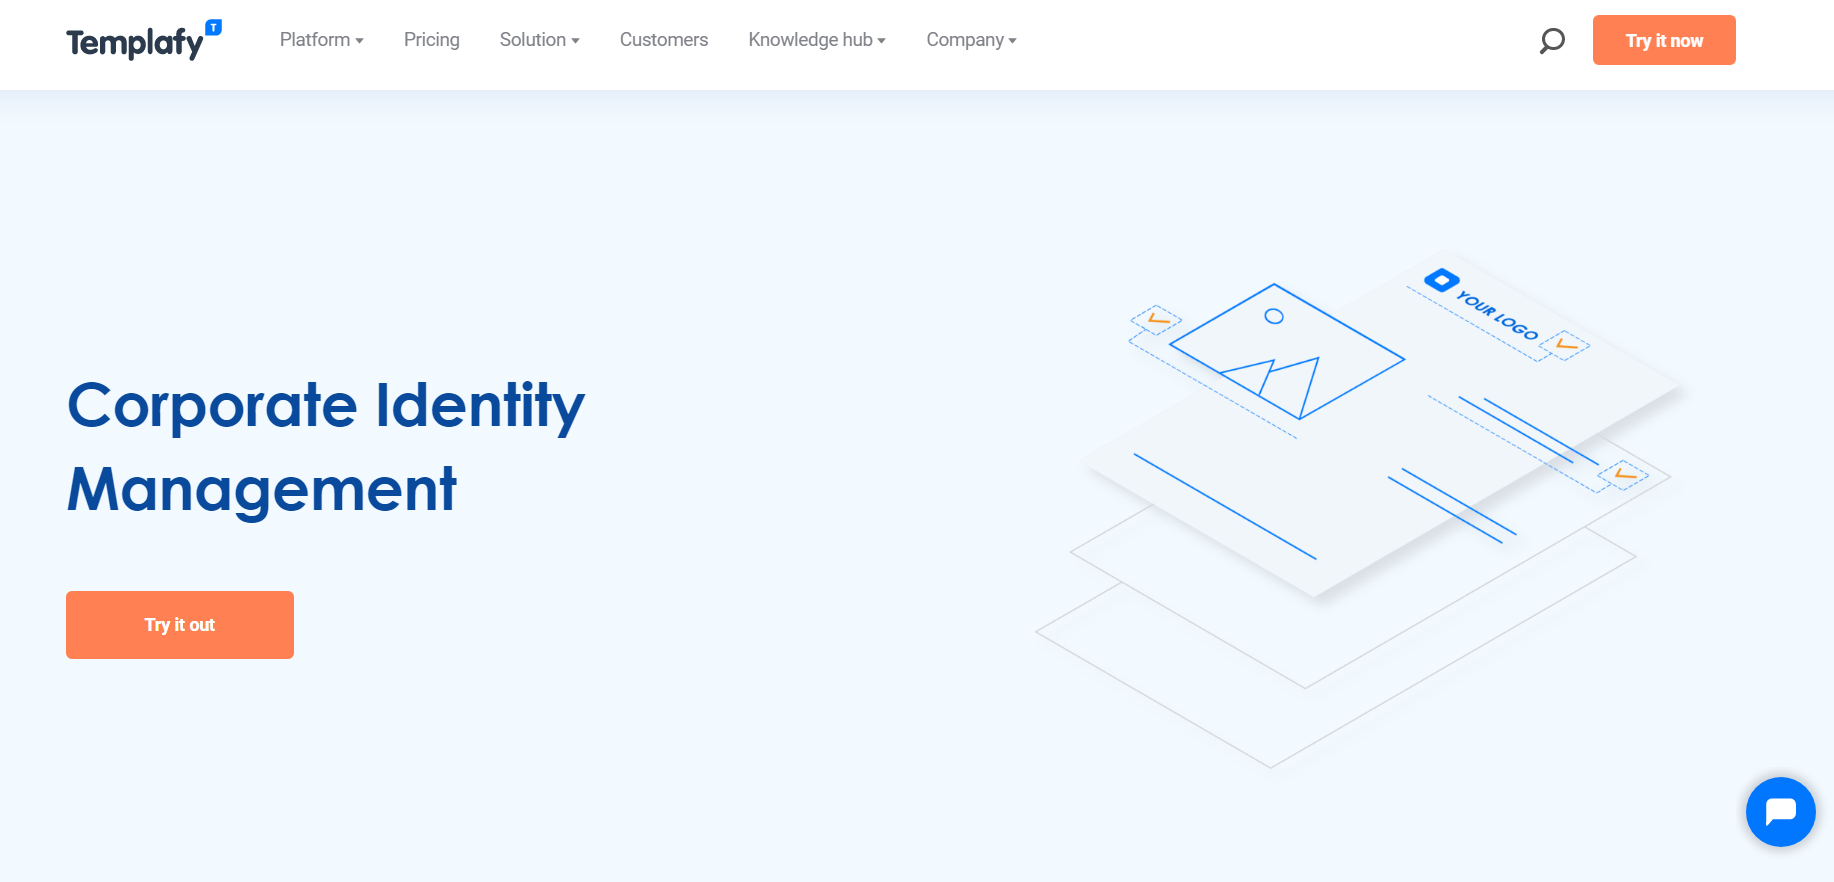 Templafy corporate identity management page.